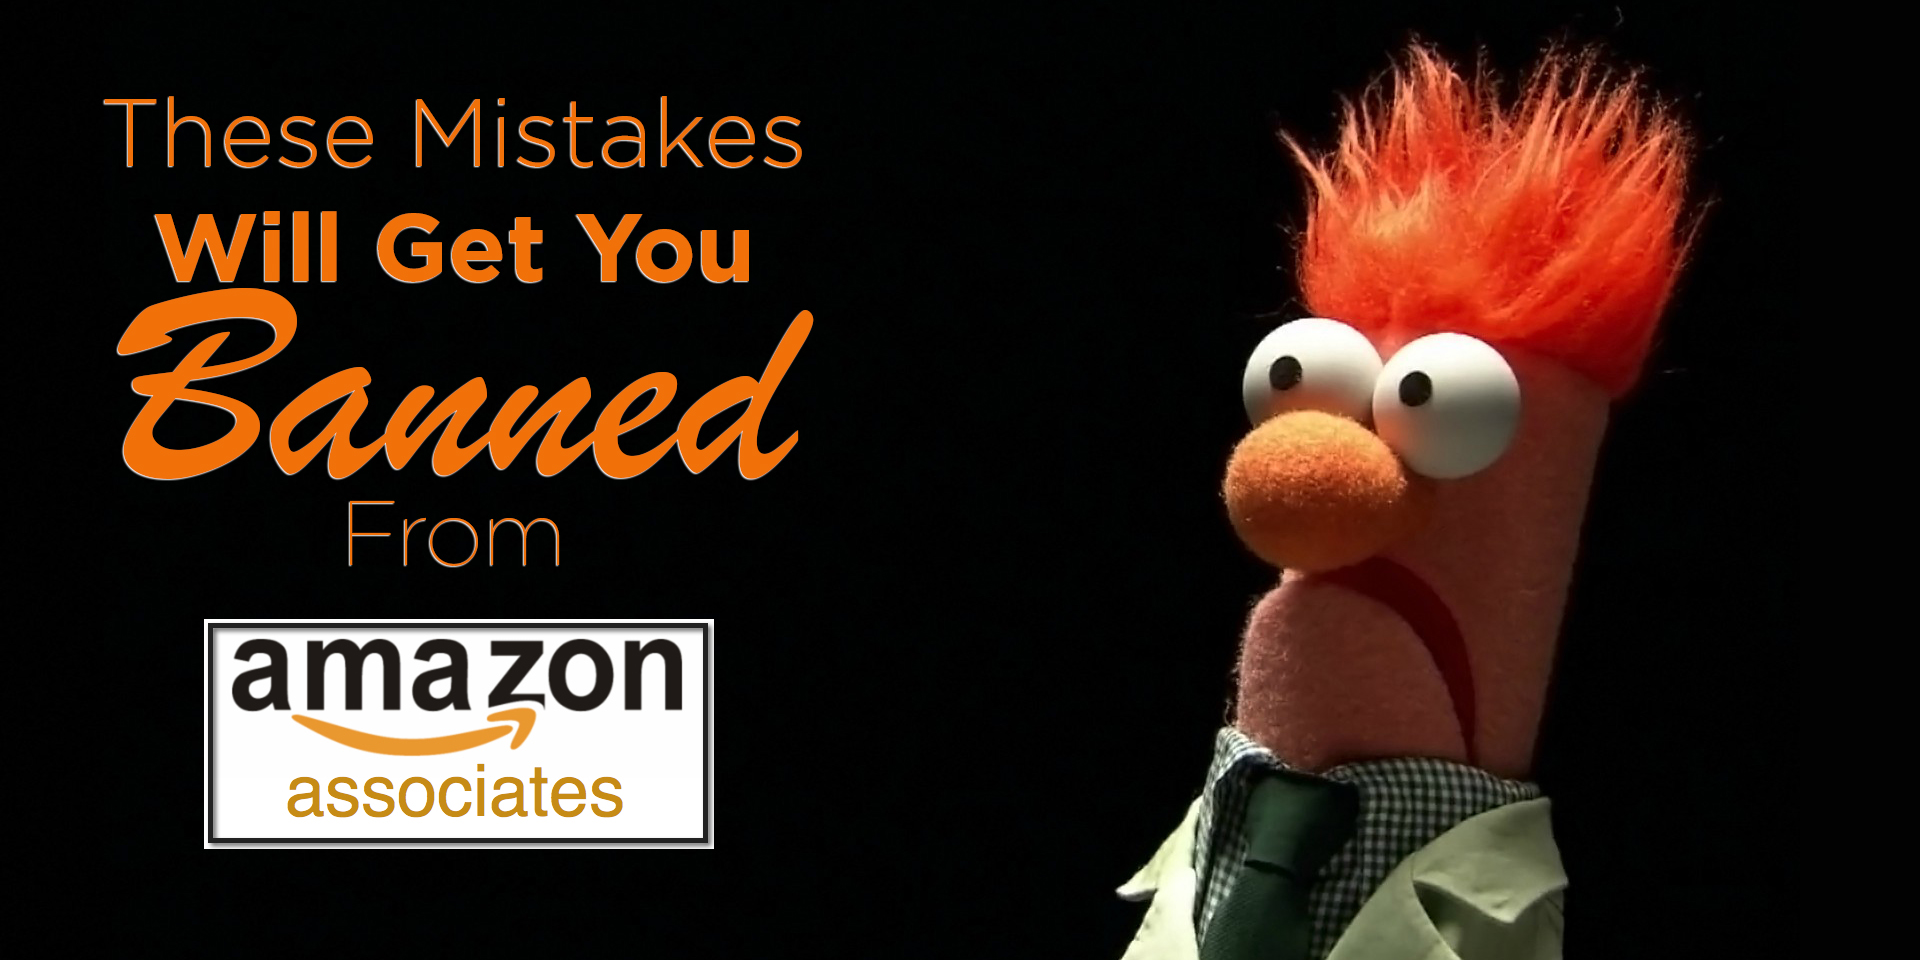 These Mistakes Will Get You Banned As An Amazon Affiliate (Most Do # 1 & 7)